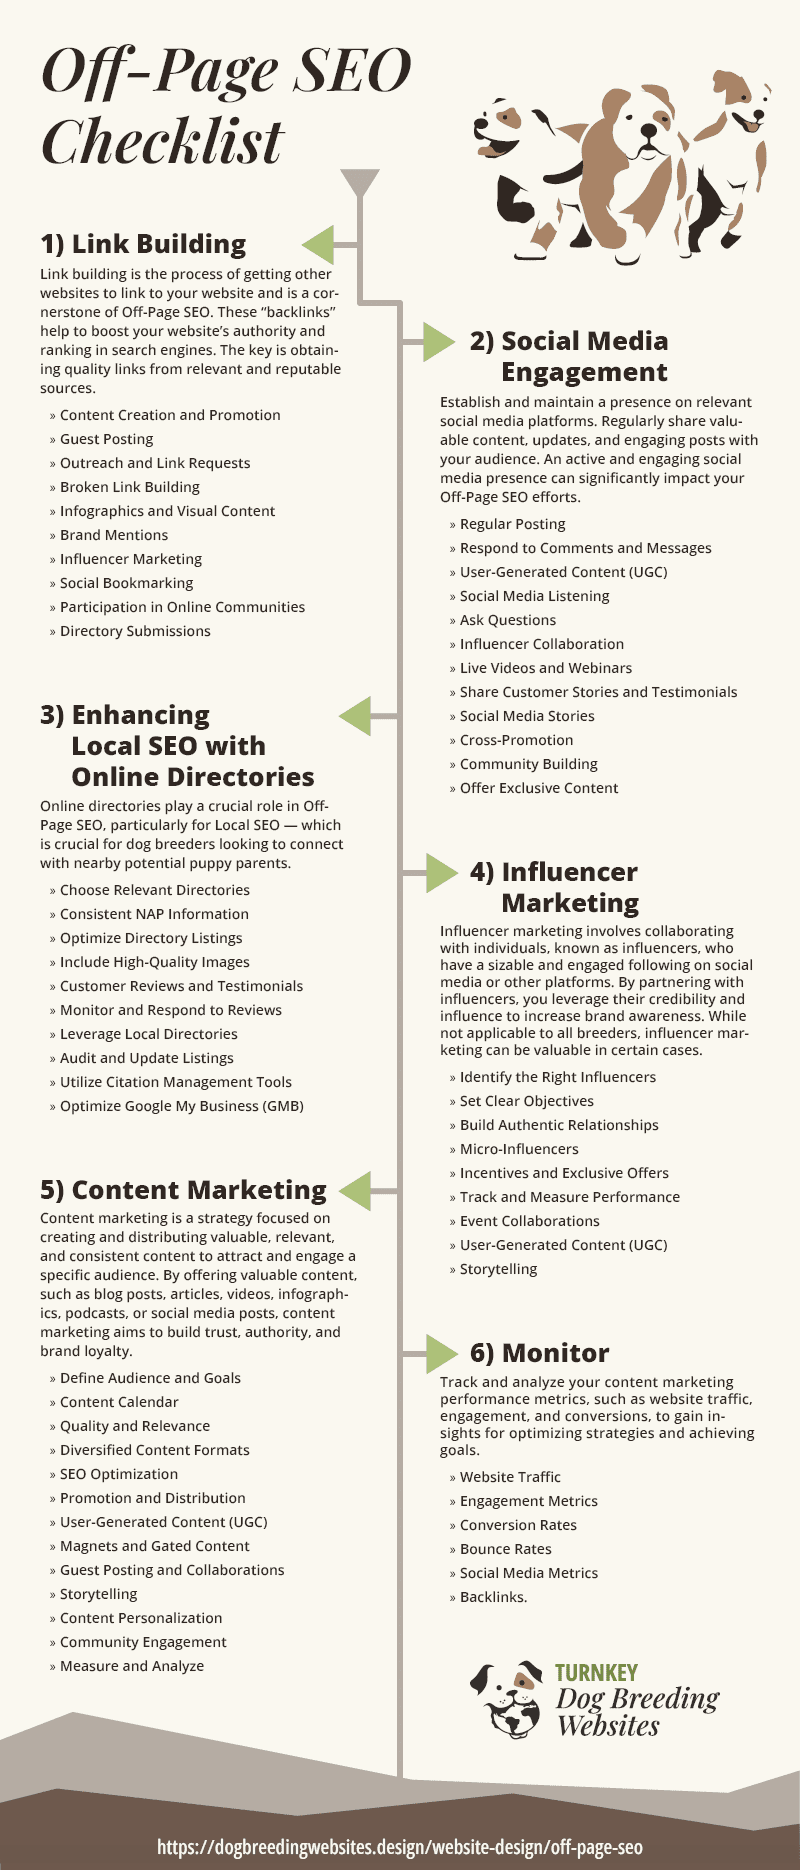 Off-Page SEO Checklist Infographic